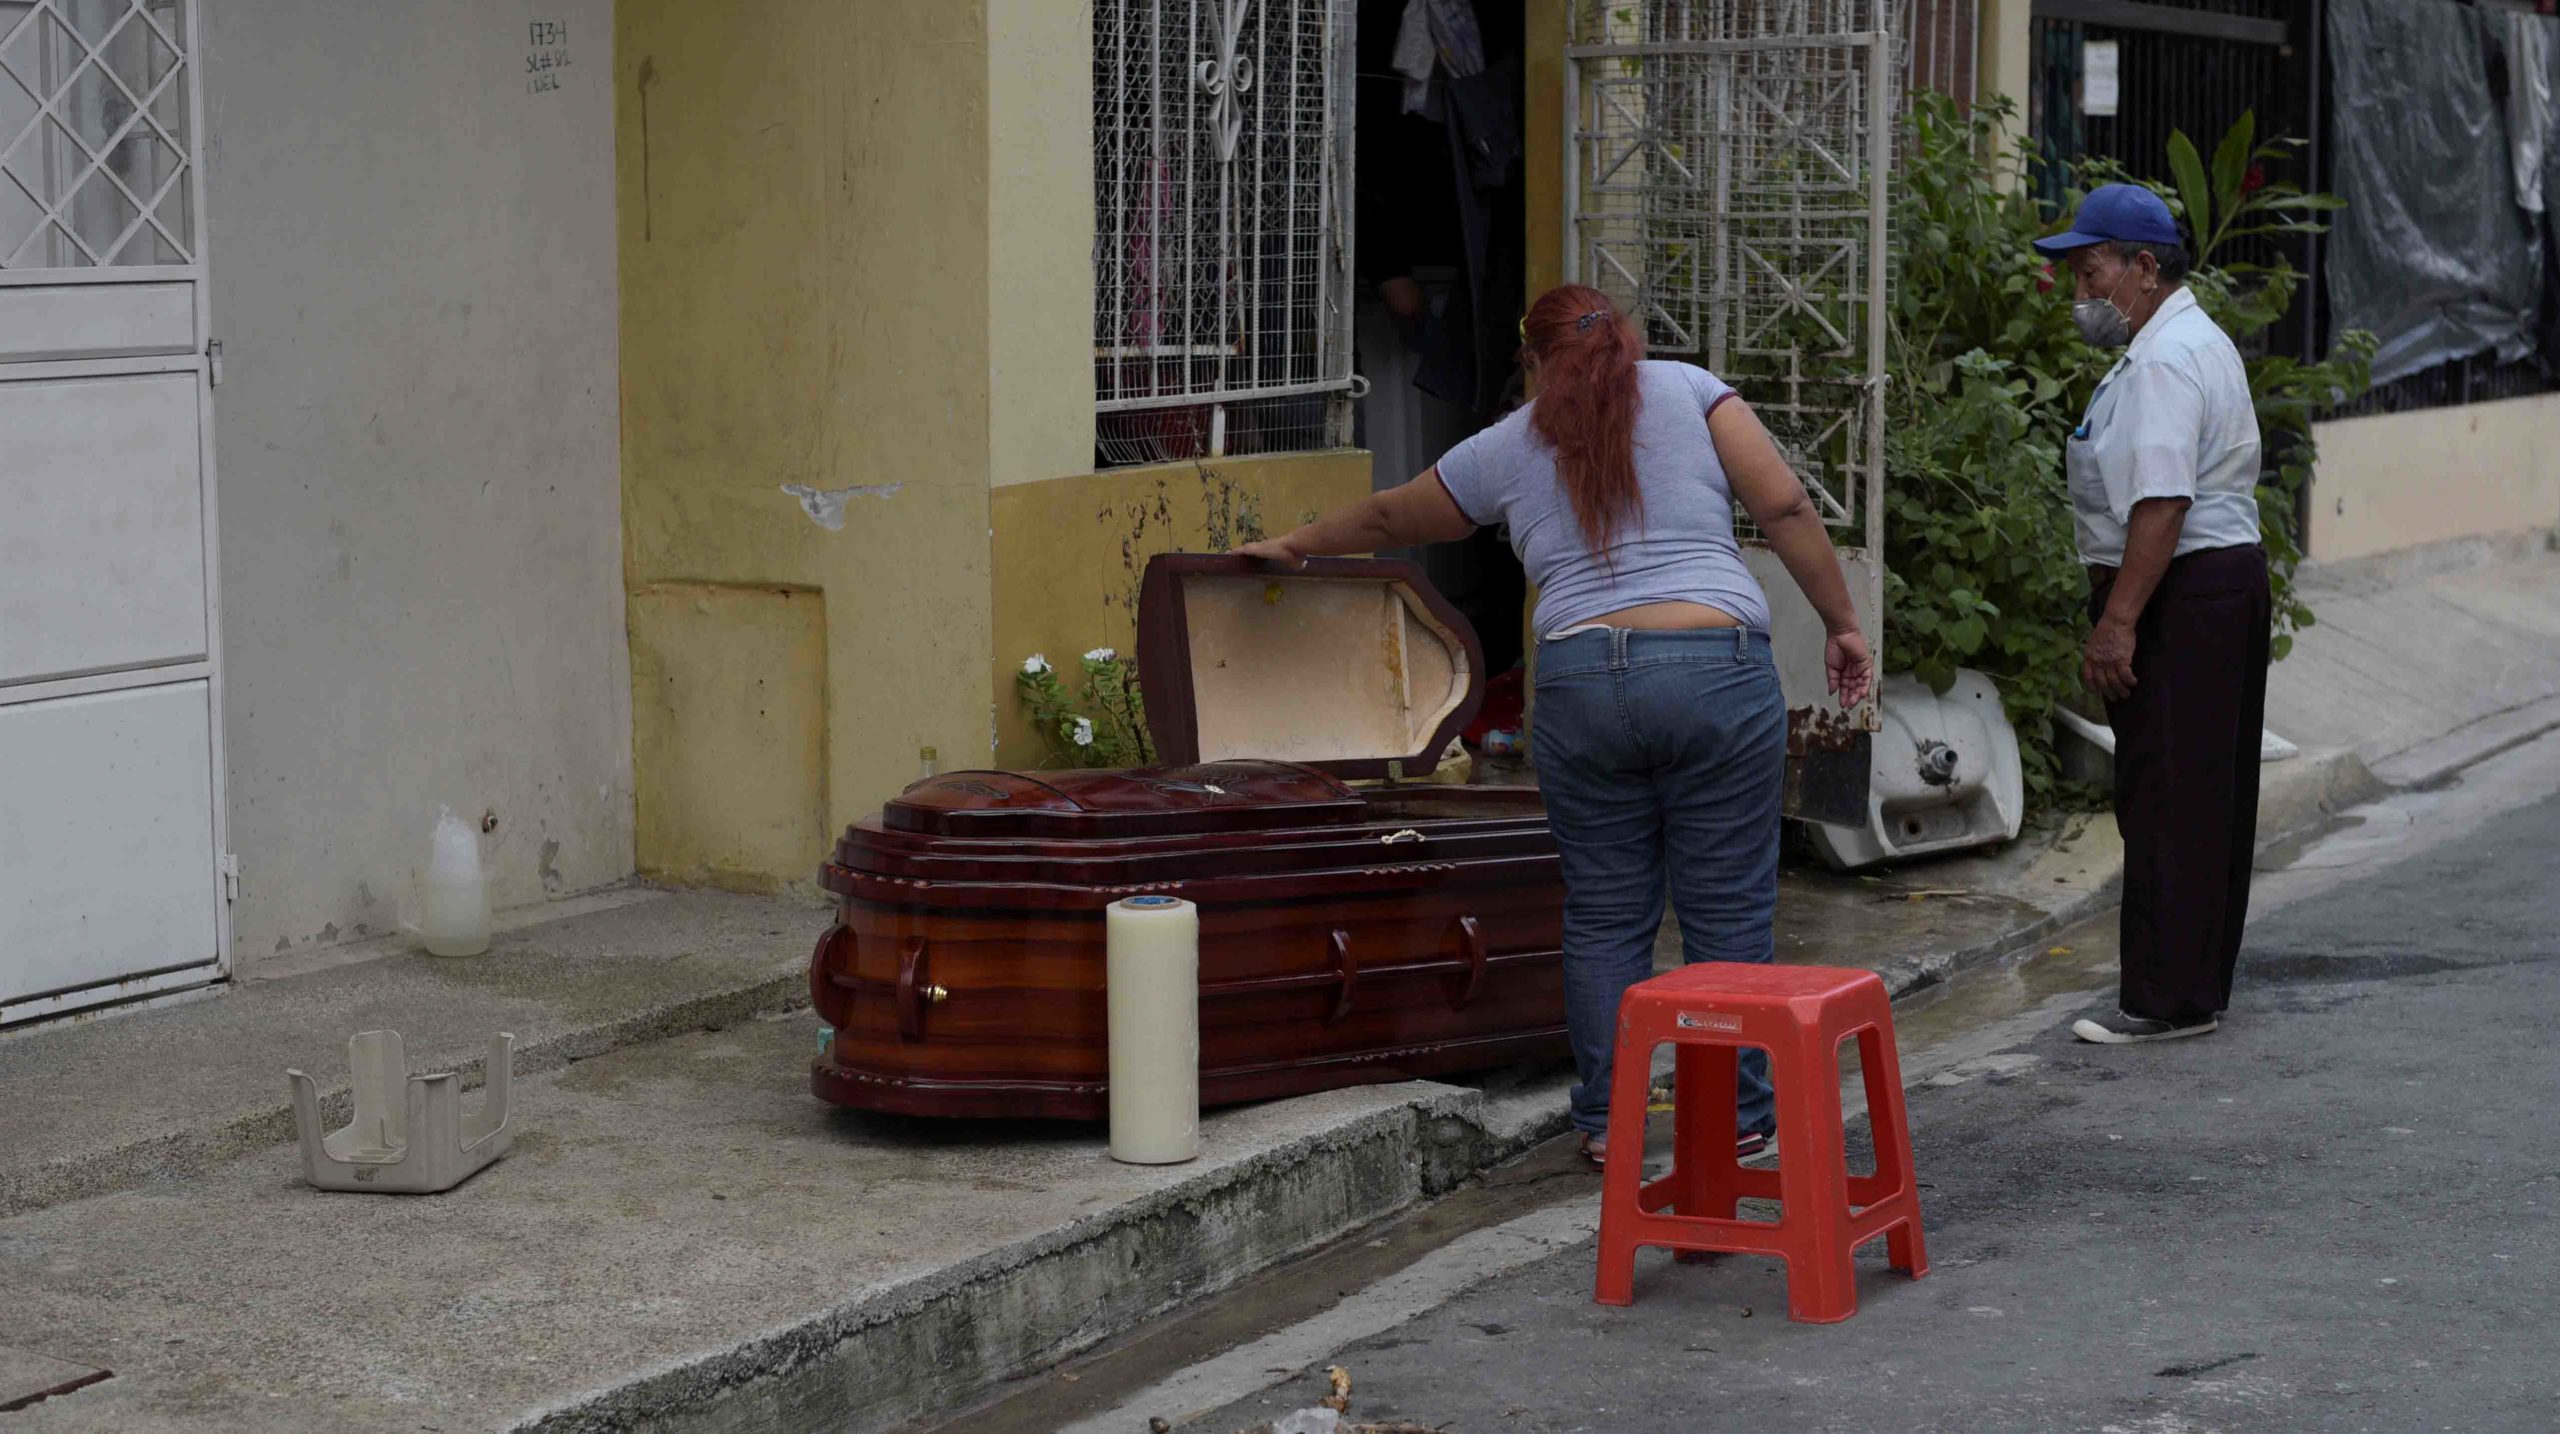 Féretros A woman looks into a coffin holding the dead body of her mother after she died at home yesterday, during the outbreak of the coronavirus disease (COVID-19), in Guayaquil